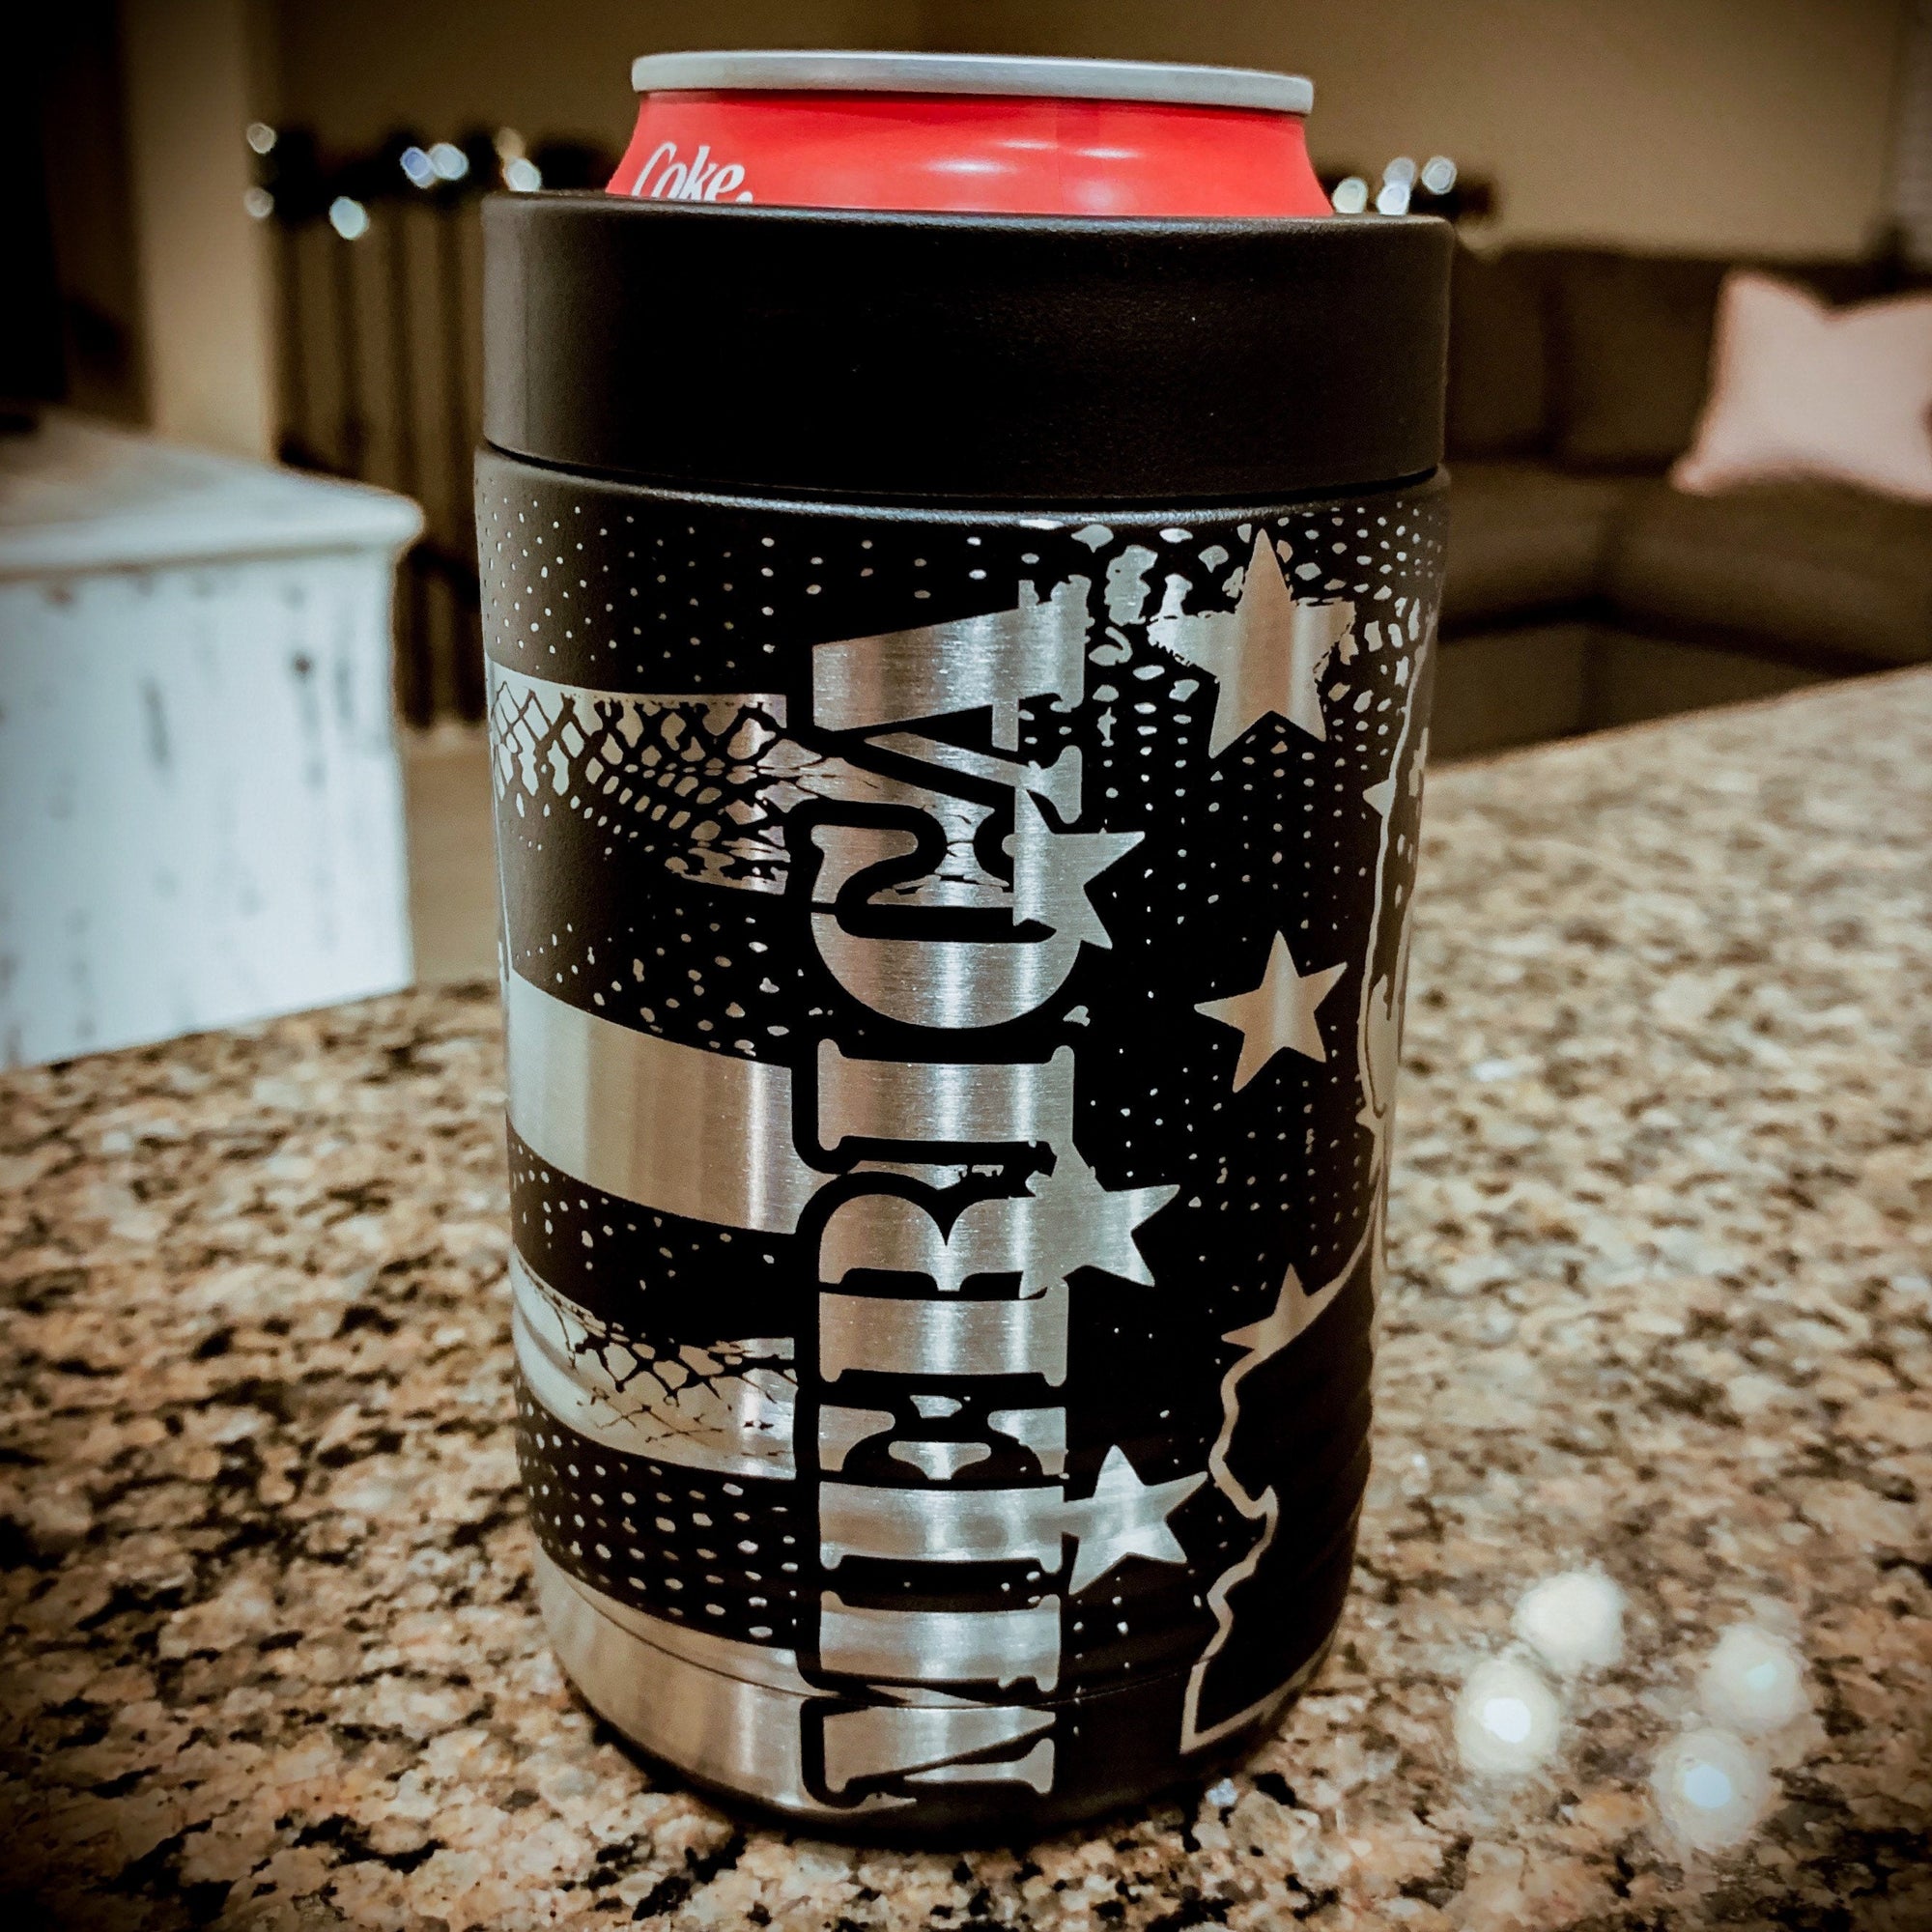 American Flag Can Cooler - Stainless Steel Torn Flag Beer Cooler